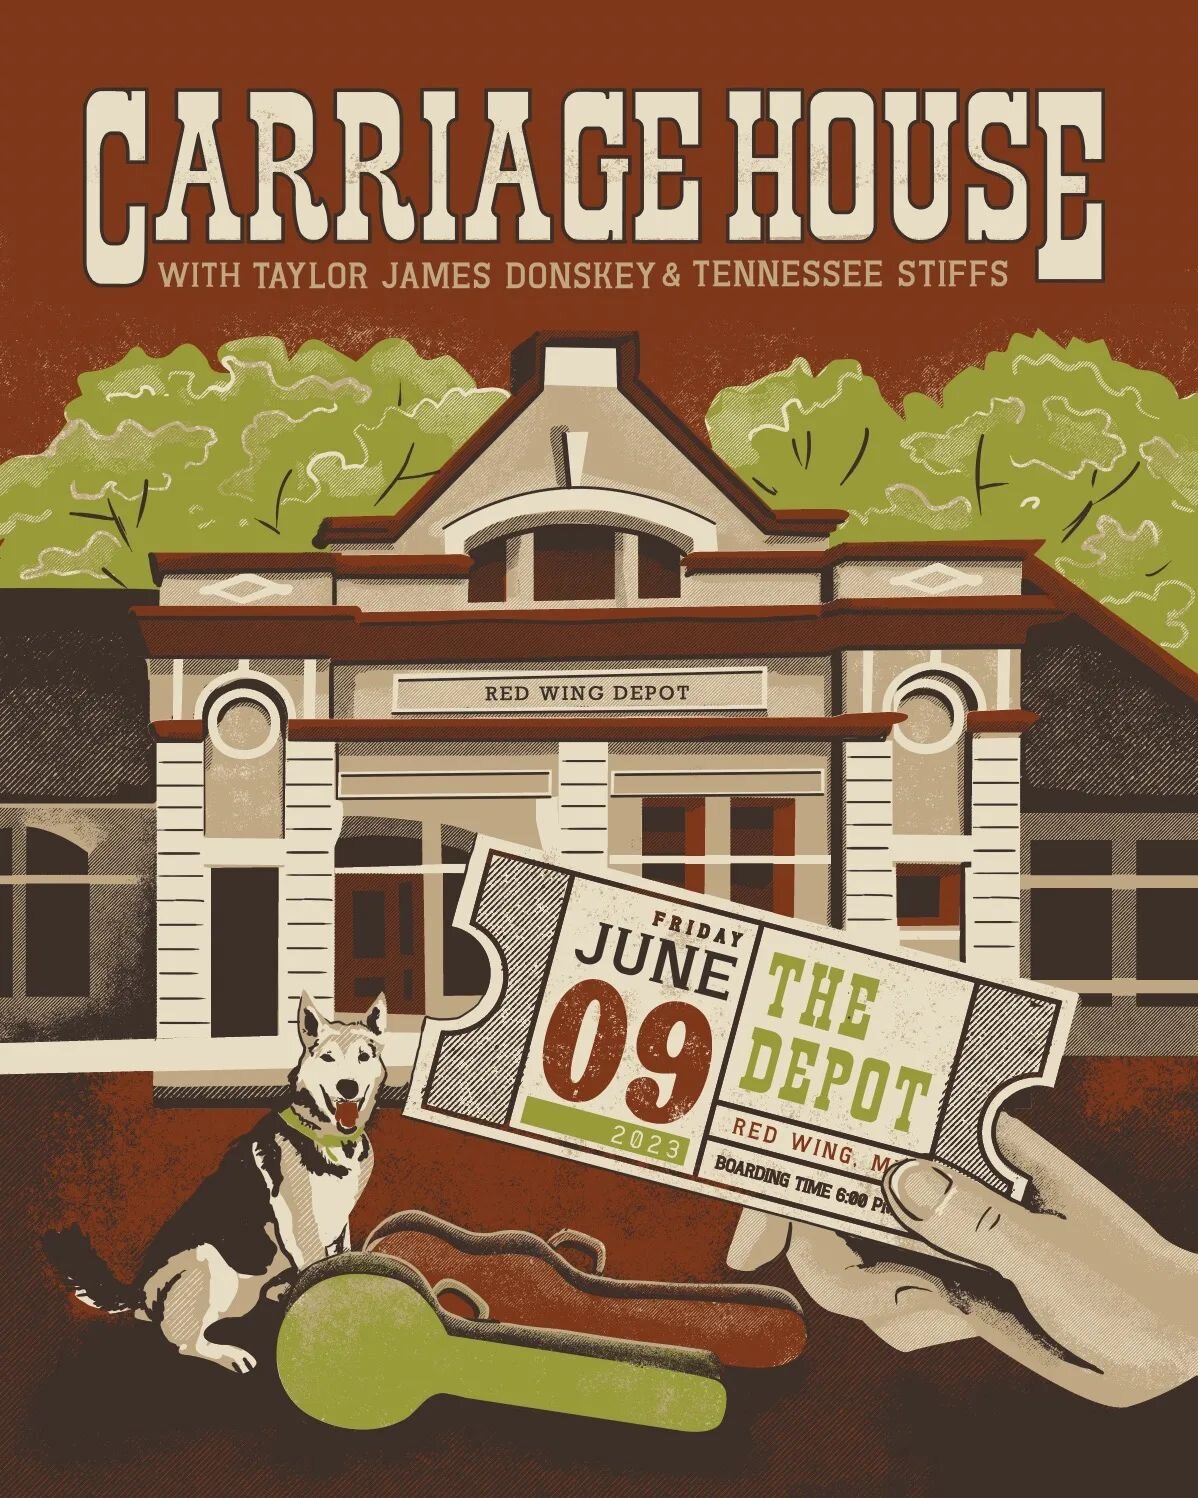 Red Wing! Next month I'll be joining Carriage House and Tennessee Stiffs down at the Red Wing Depot. Mark those calendars! 

@carriagehousetunes
@tennesseestiffs

#livemusicminnesota 
#livemusicredwing
#redwingluthierschool 
#livemusic
#newmusic
#rea